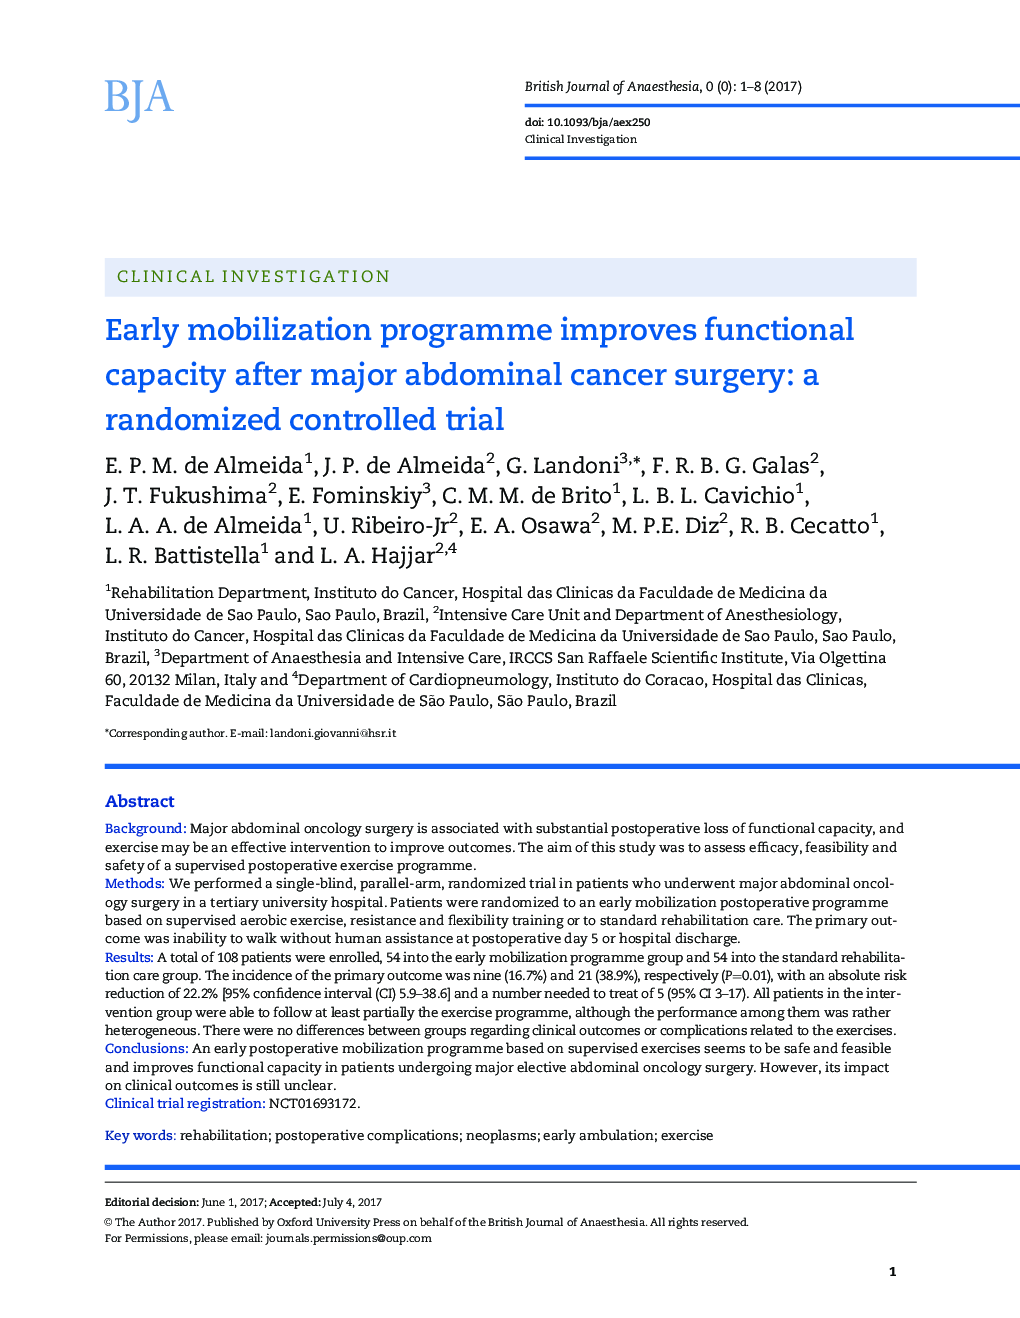 Early mobilization programme improves functional capacity after major abdominal cancer surgery: a randomized controlled trial